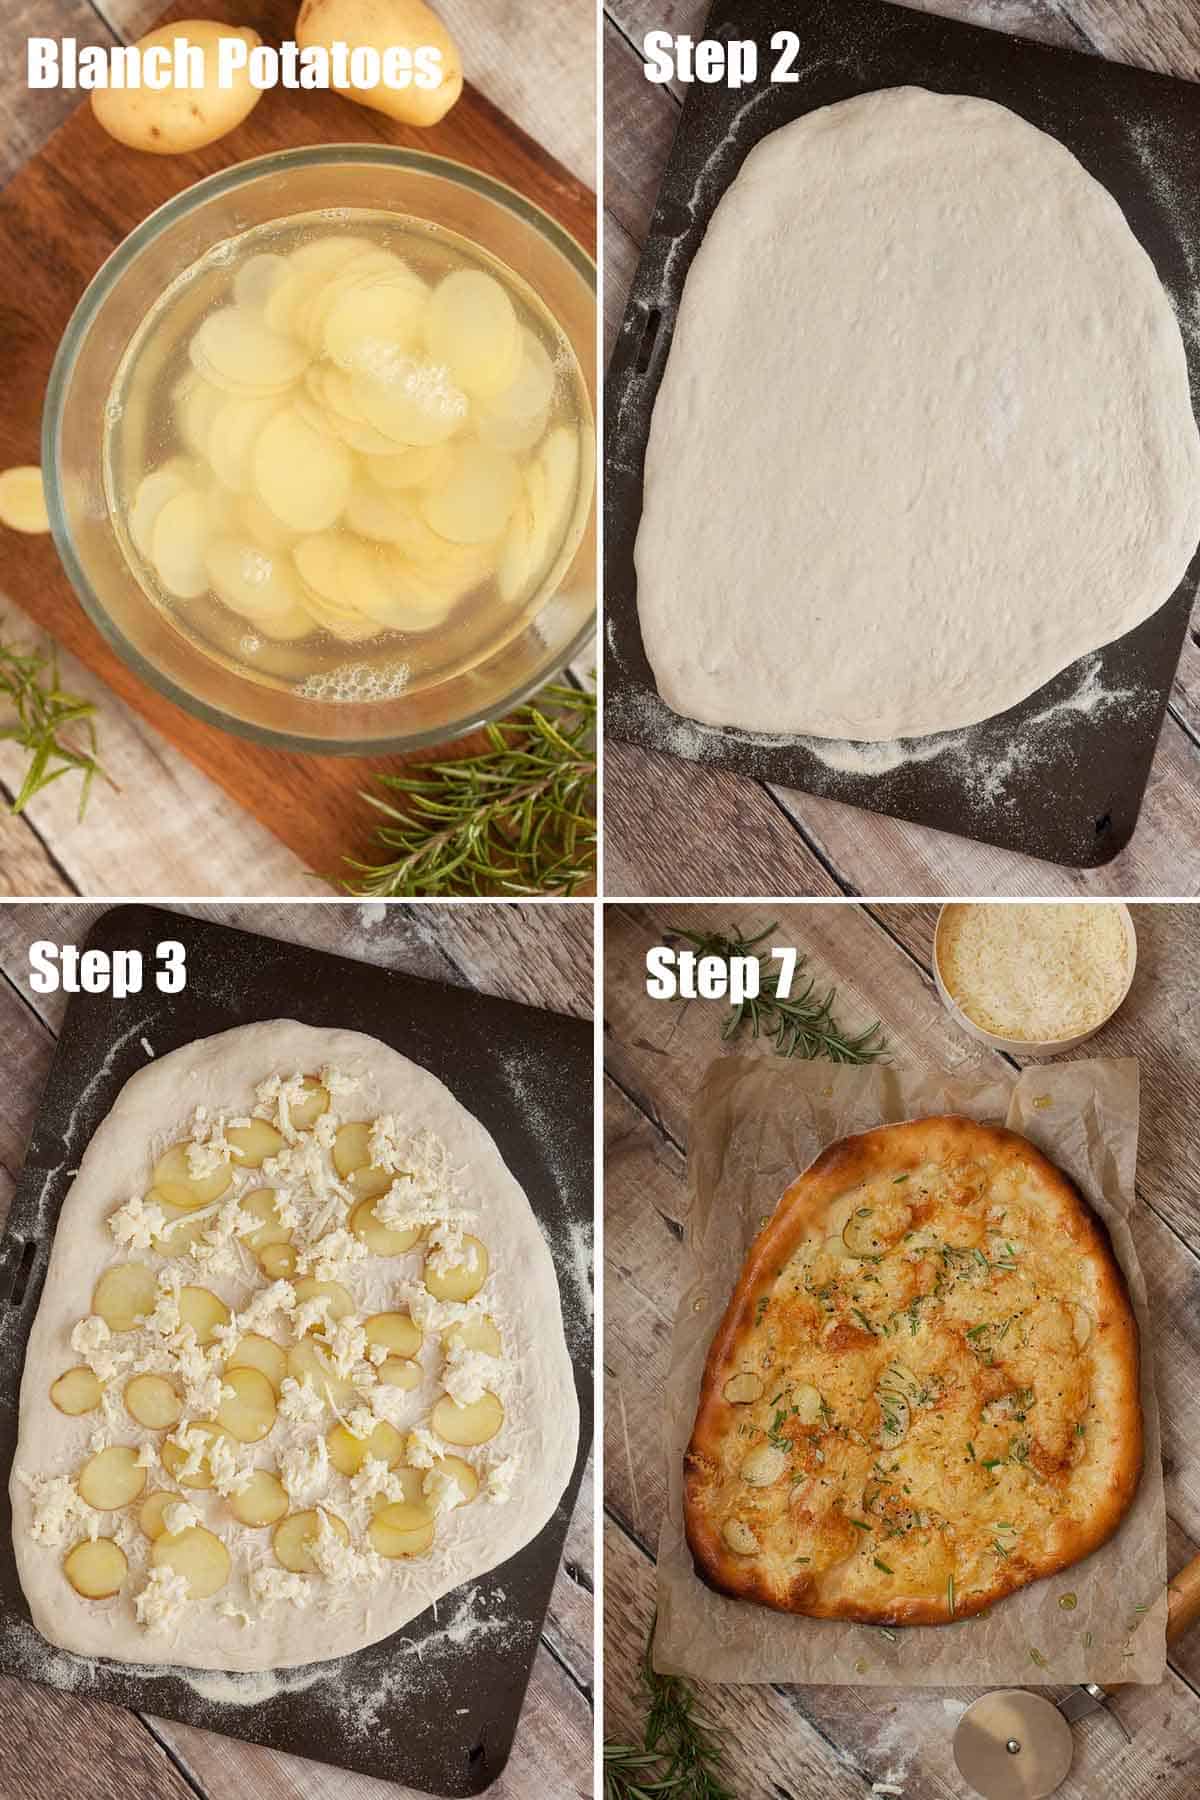 Collage of images showing a white pizza with potatoes being assembled.